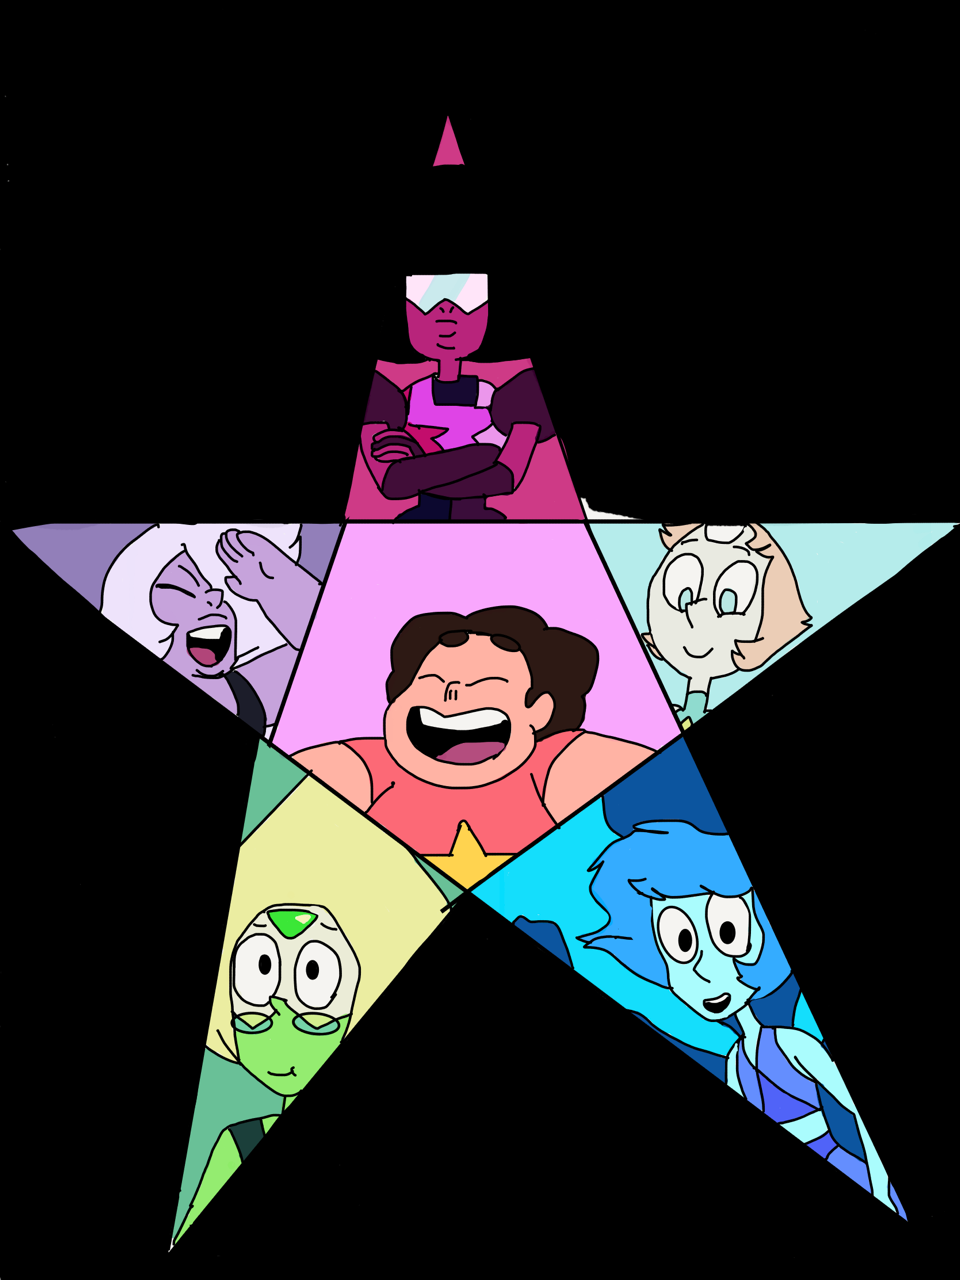 After i redrew the great diamond authority i decided to make a sign for the crystal gems so heres what I came up with!